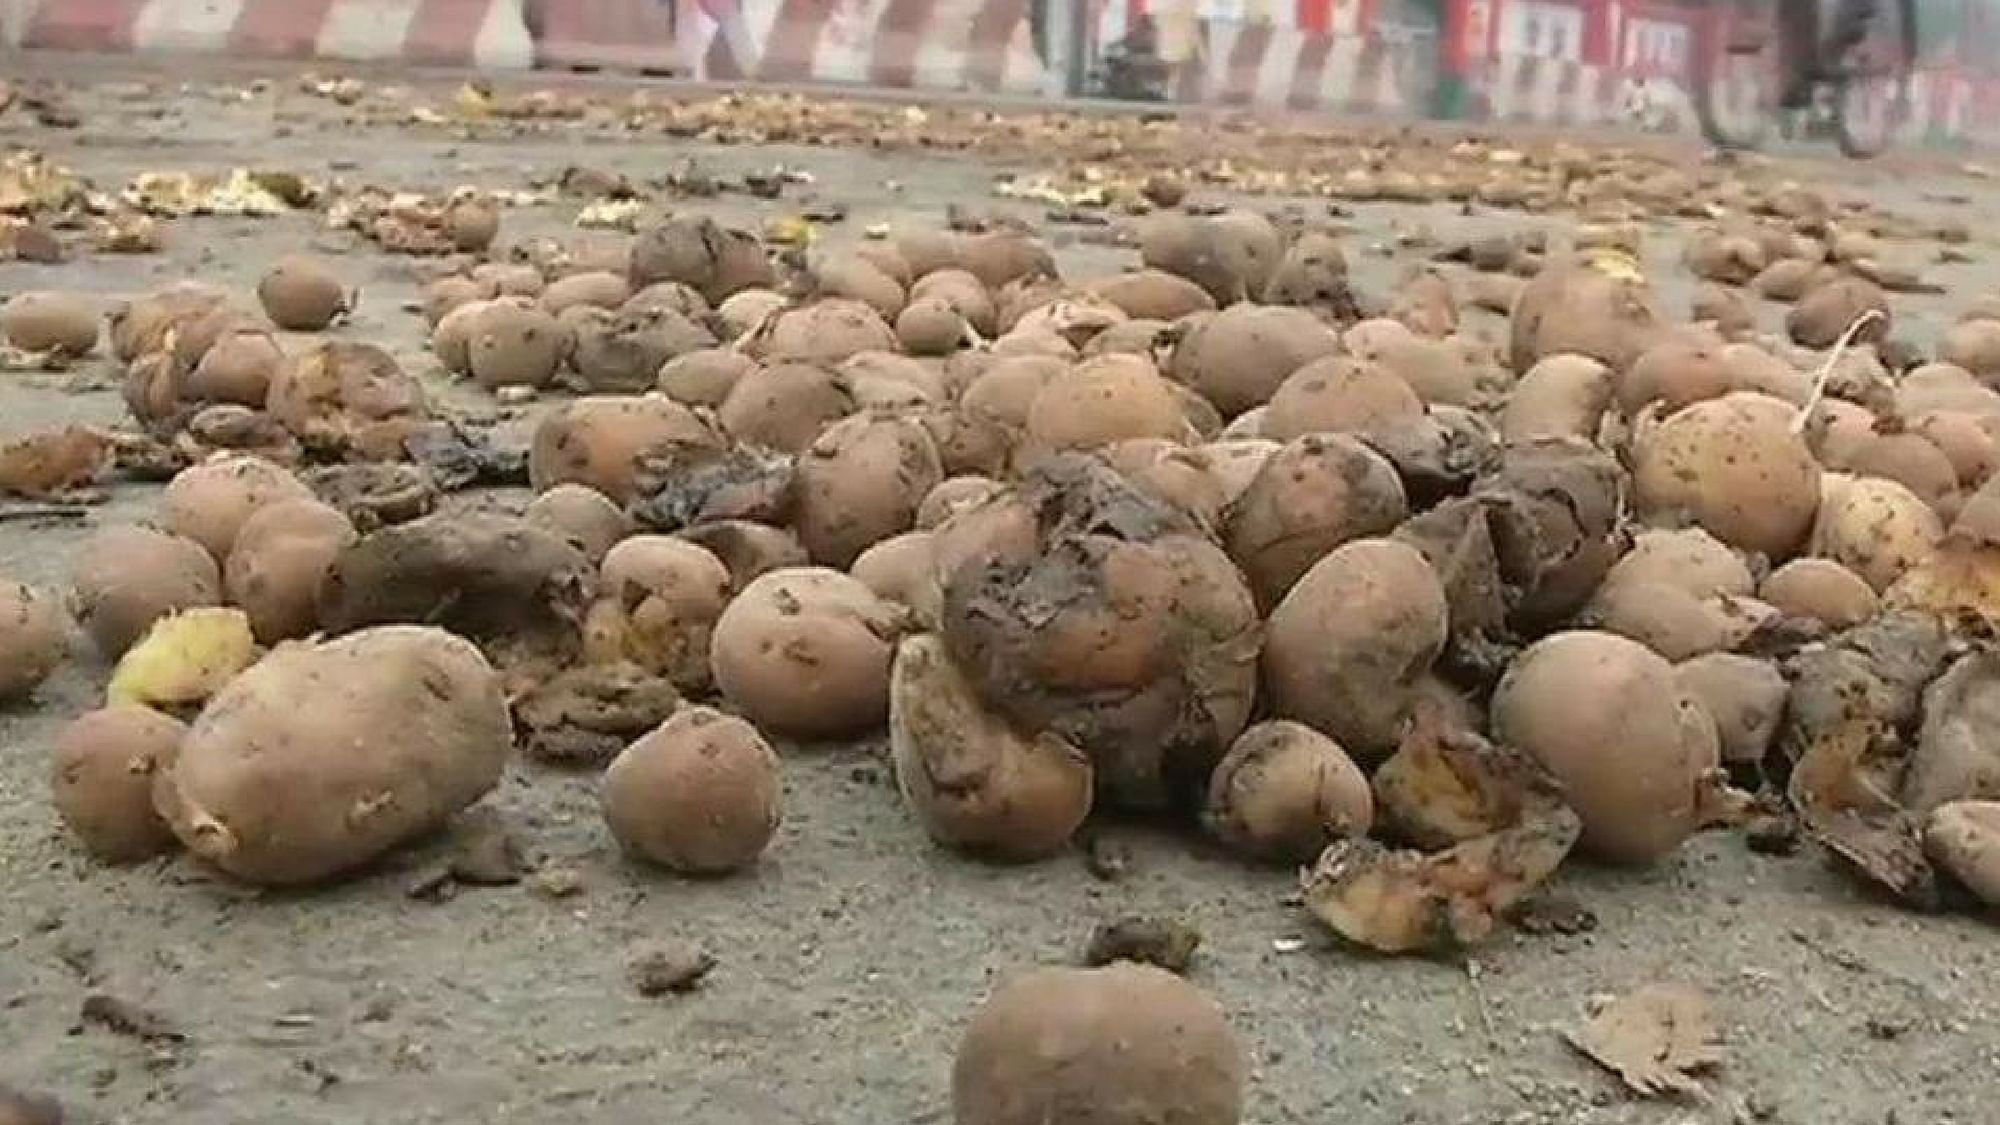 Potatoes were hurled from a truck in Lucknow.